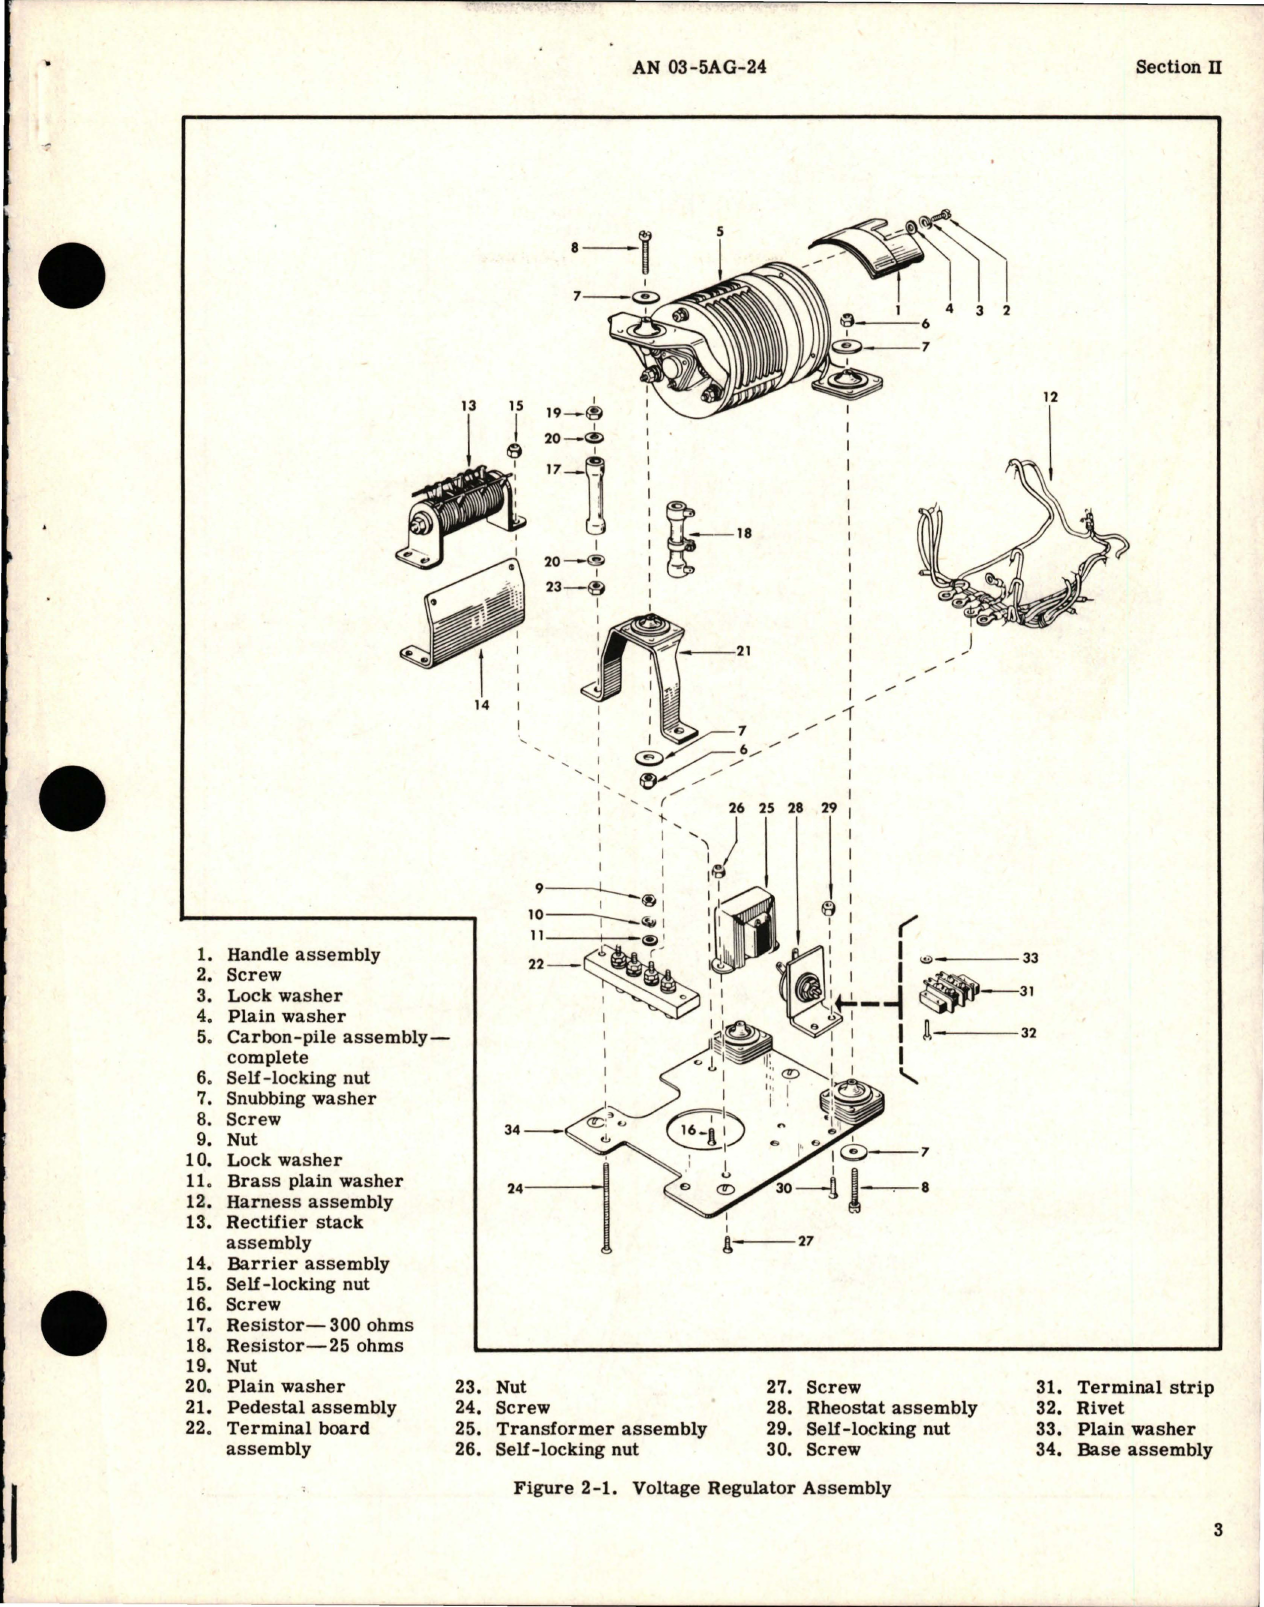 Sample page 5 from AirCorps Library document: Overhaul Instructions for Voltage Regulators - Models F45-95, F36-70, F45-51, F45-90, and JH12999-3